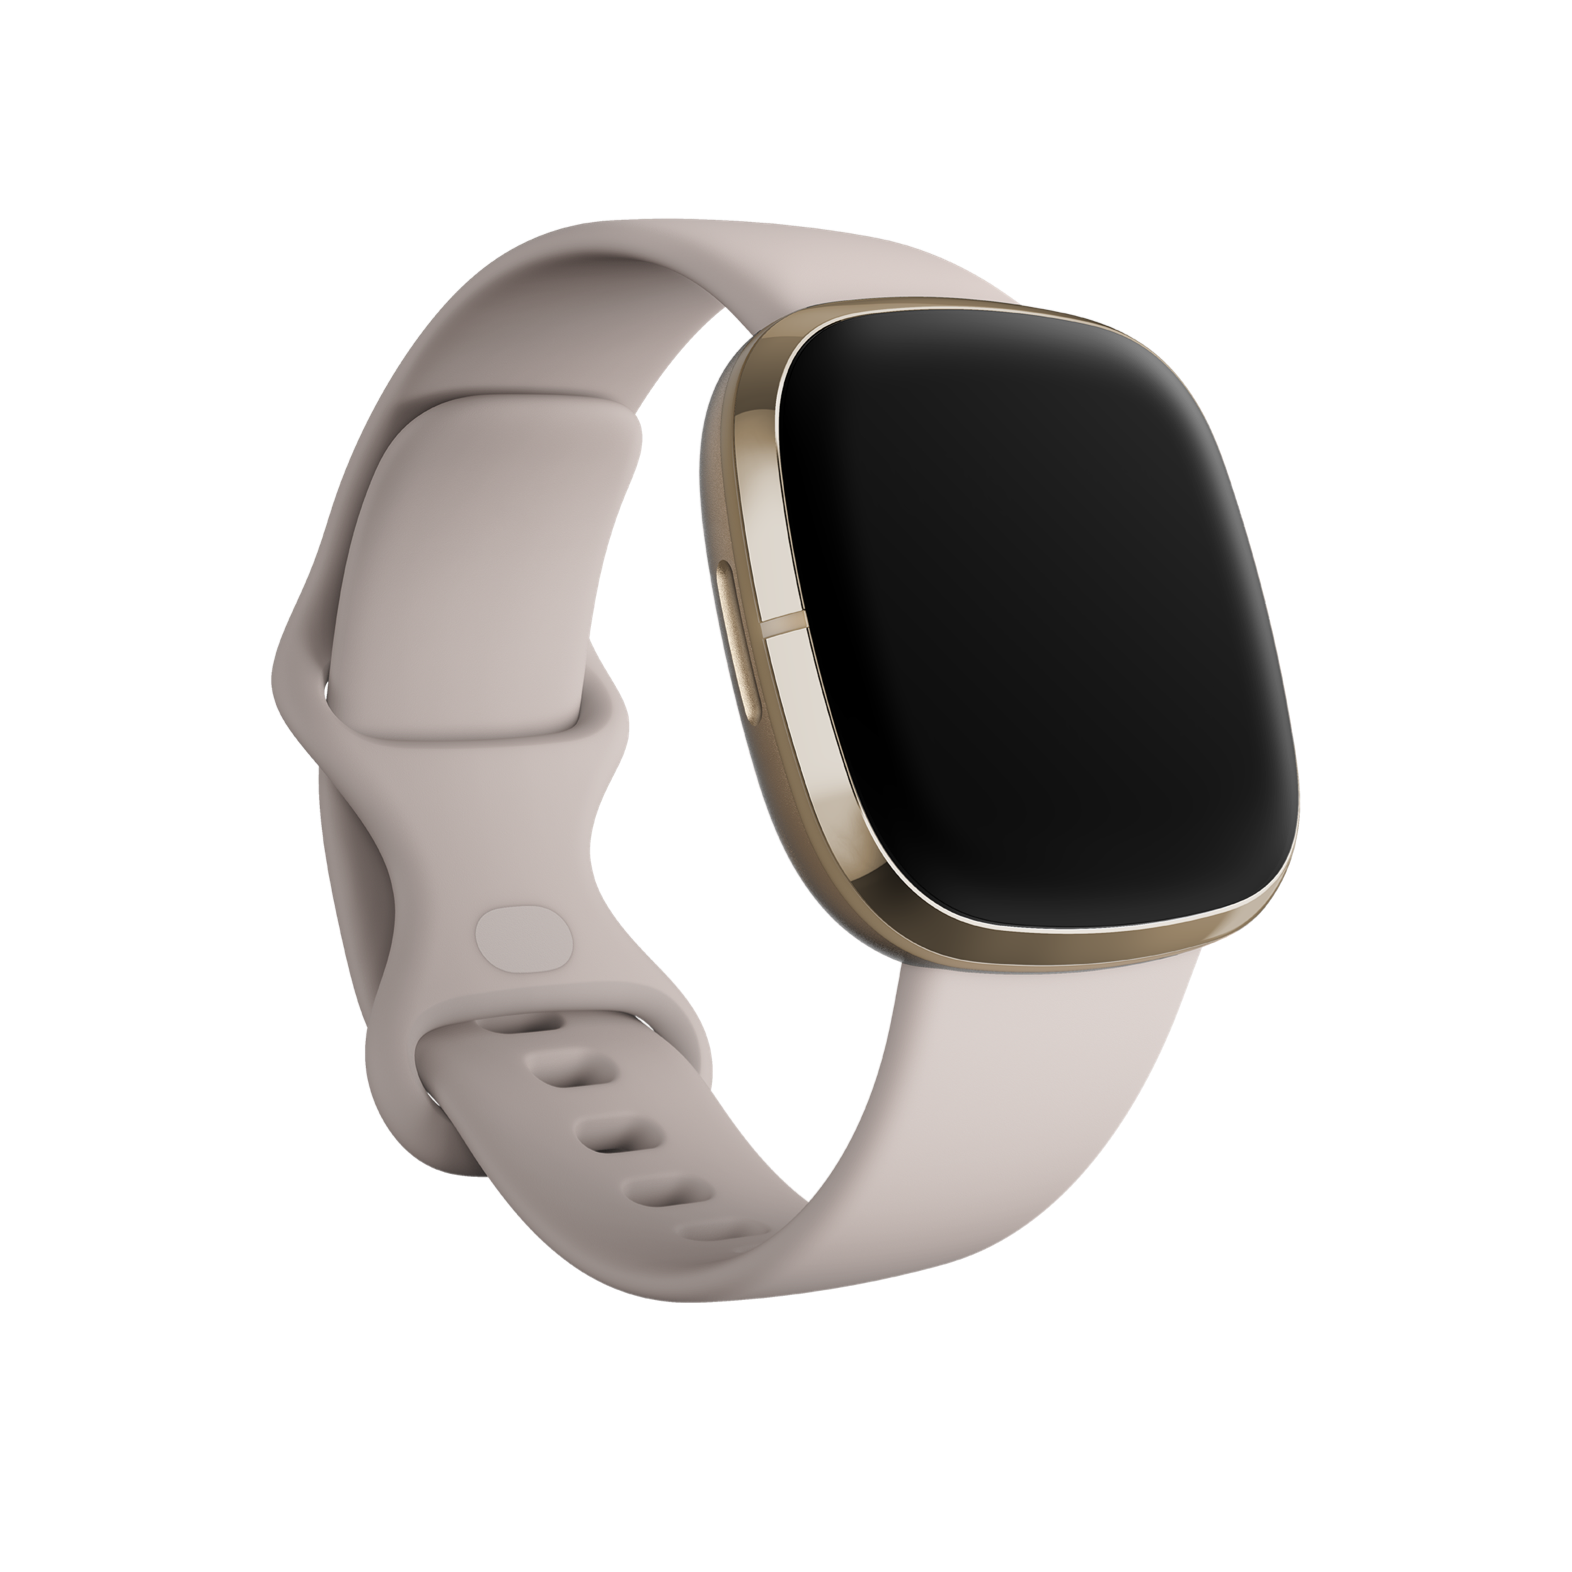 PEBBLE ONLY *New* FITBIT VERSA 3 PEBBLE Gold